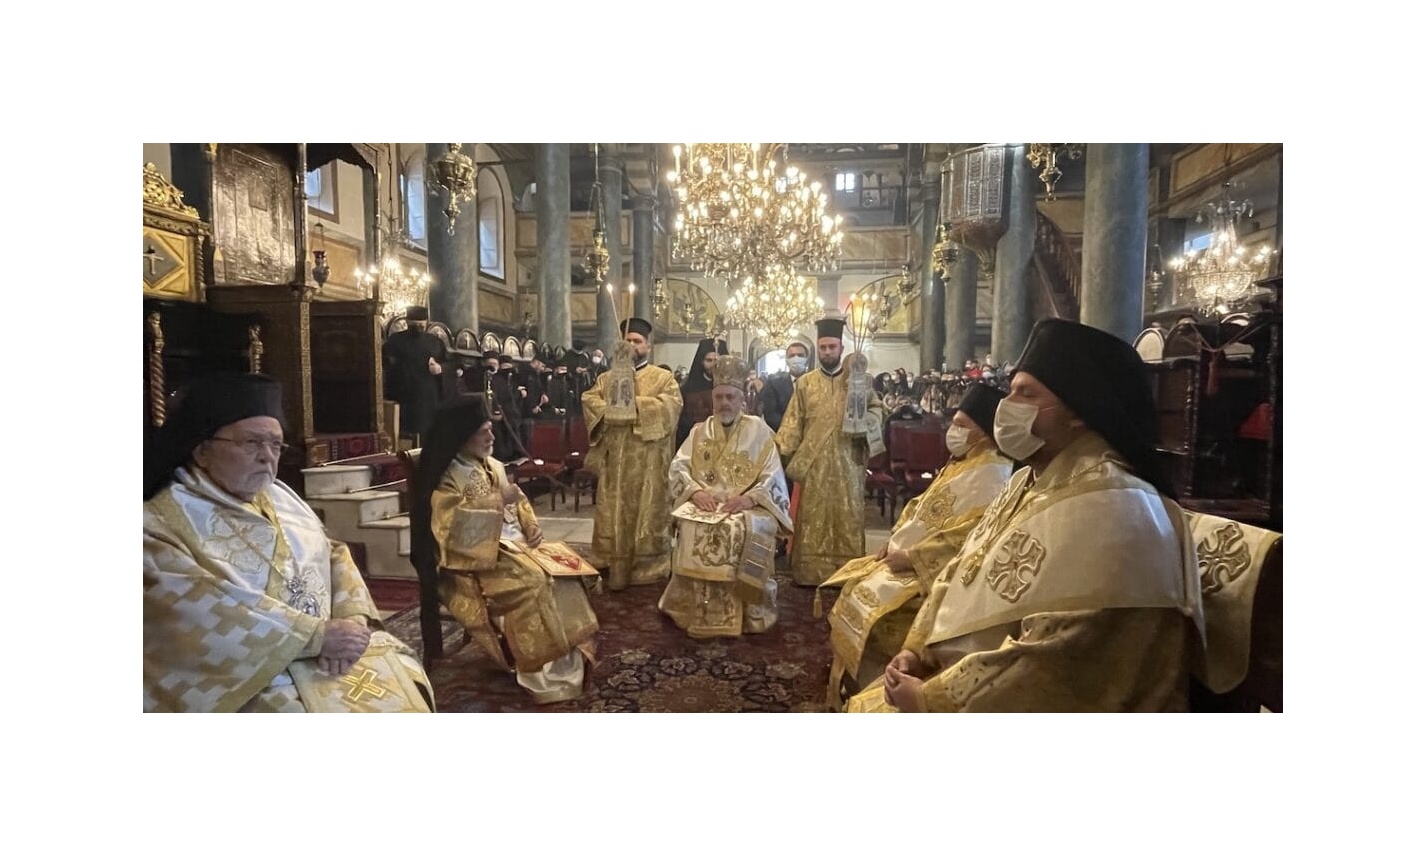    Metropolitan Emmanuel of Chalcedon (Ecumenical Patriarchate) presided over the Divine Liturgy of Christmas at St. George's Cathedral in Istanbul, Turkey.  -Patriarch Bartholomew was absent for the service as he was tested covid positive on Friday